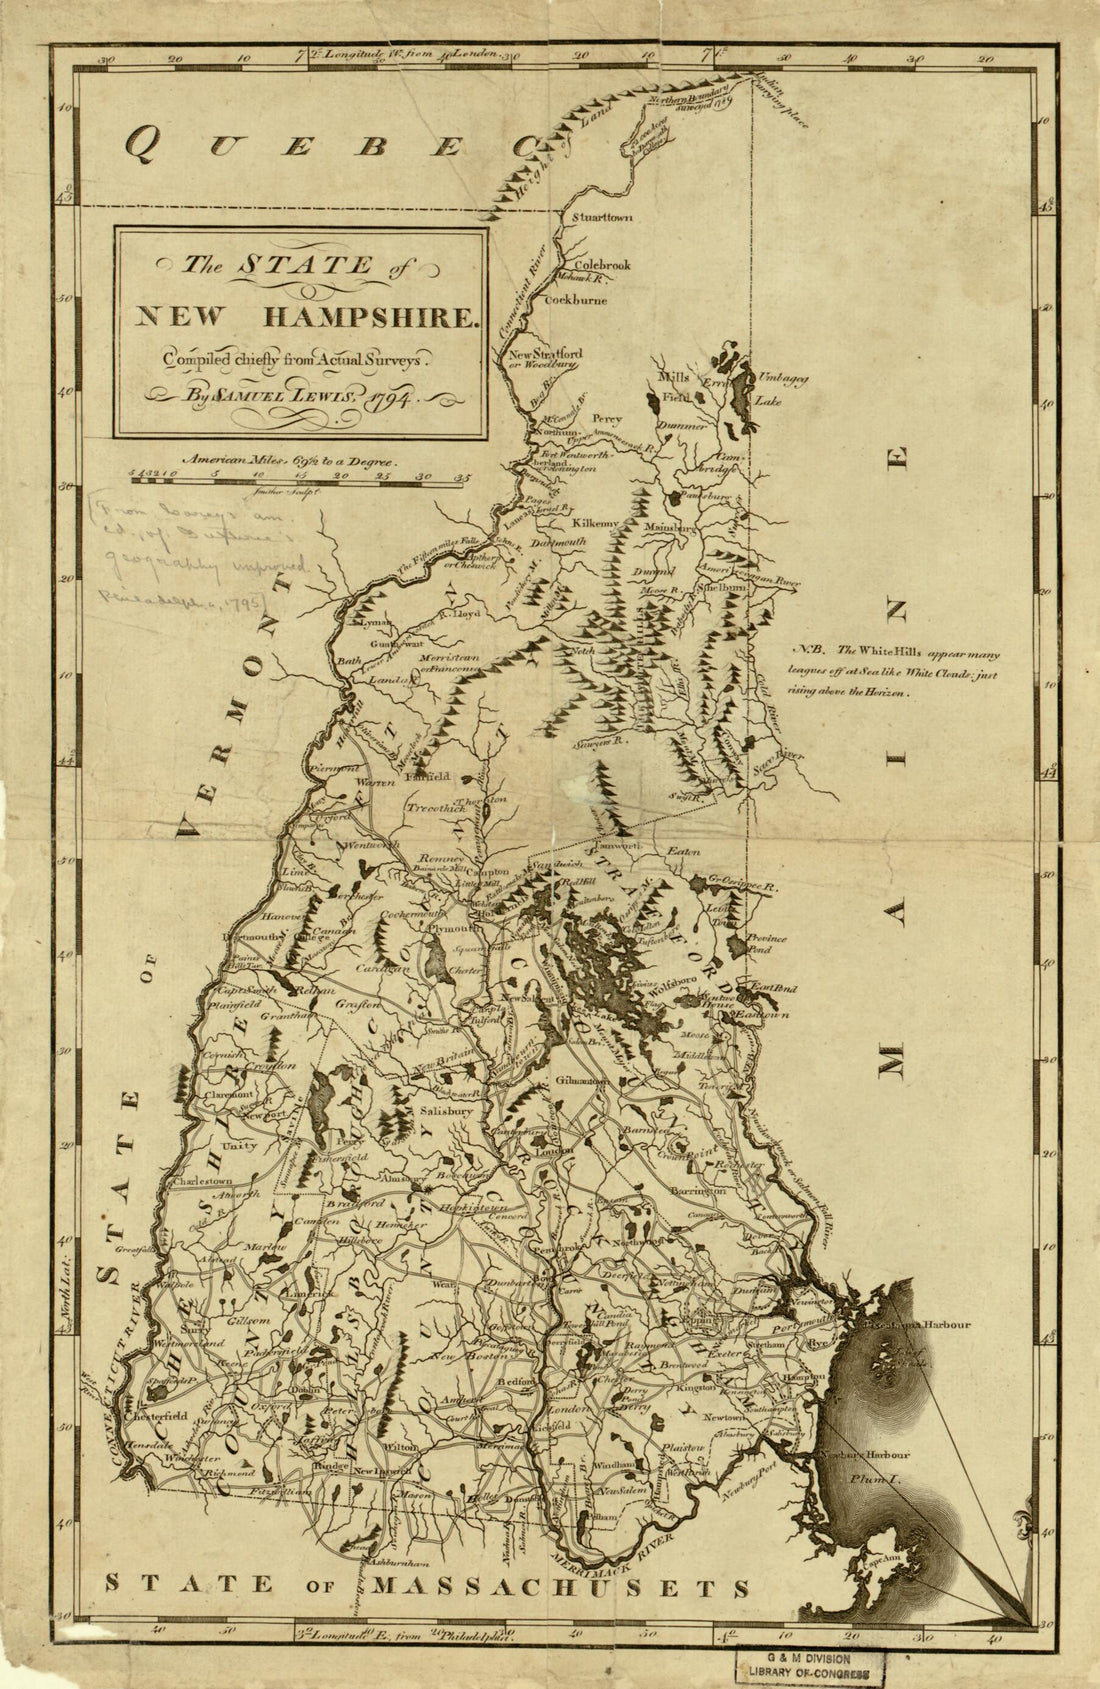 This old map of The State of New Hampshire. Compiled Chiefly from Actual Surveys from 1794 was created by Samuel Lewis, James Smither in 1794